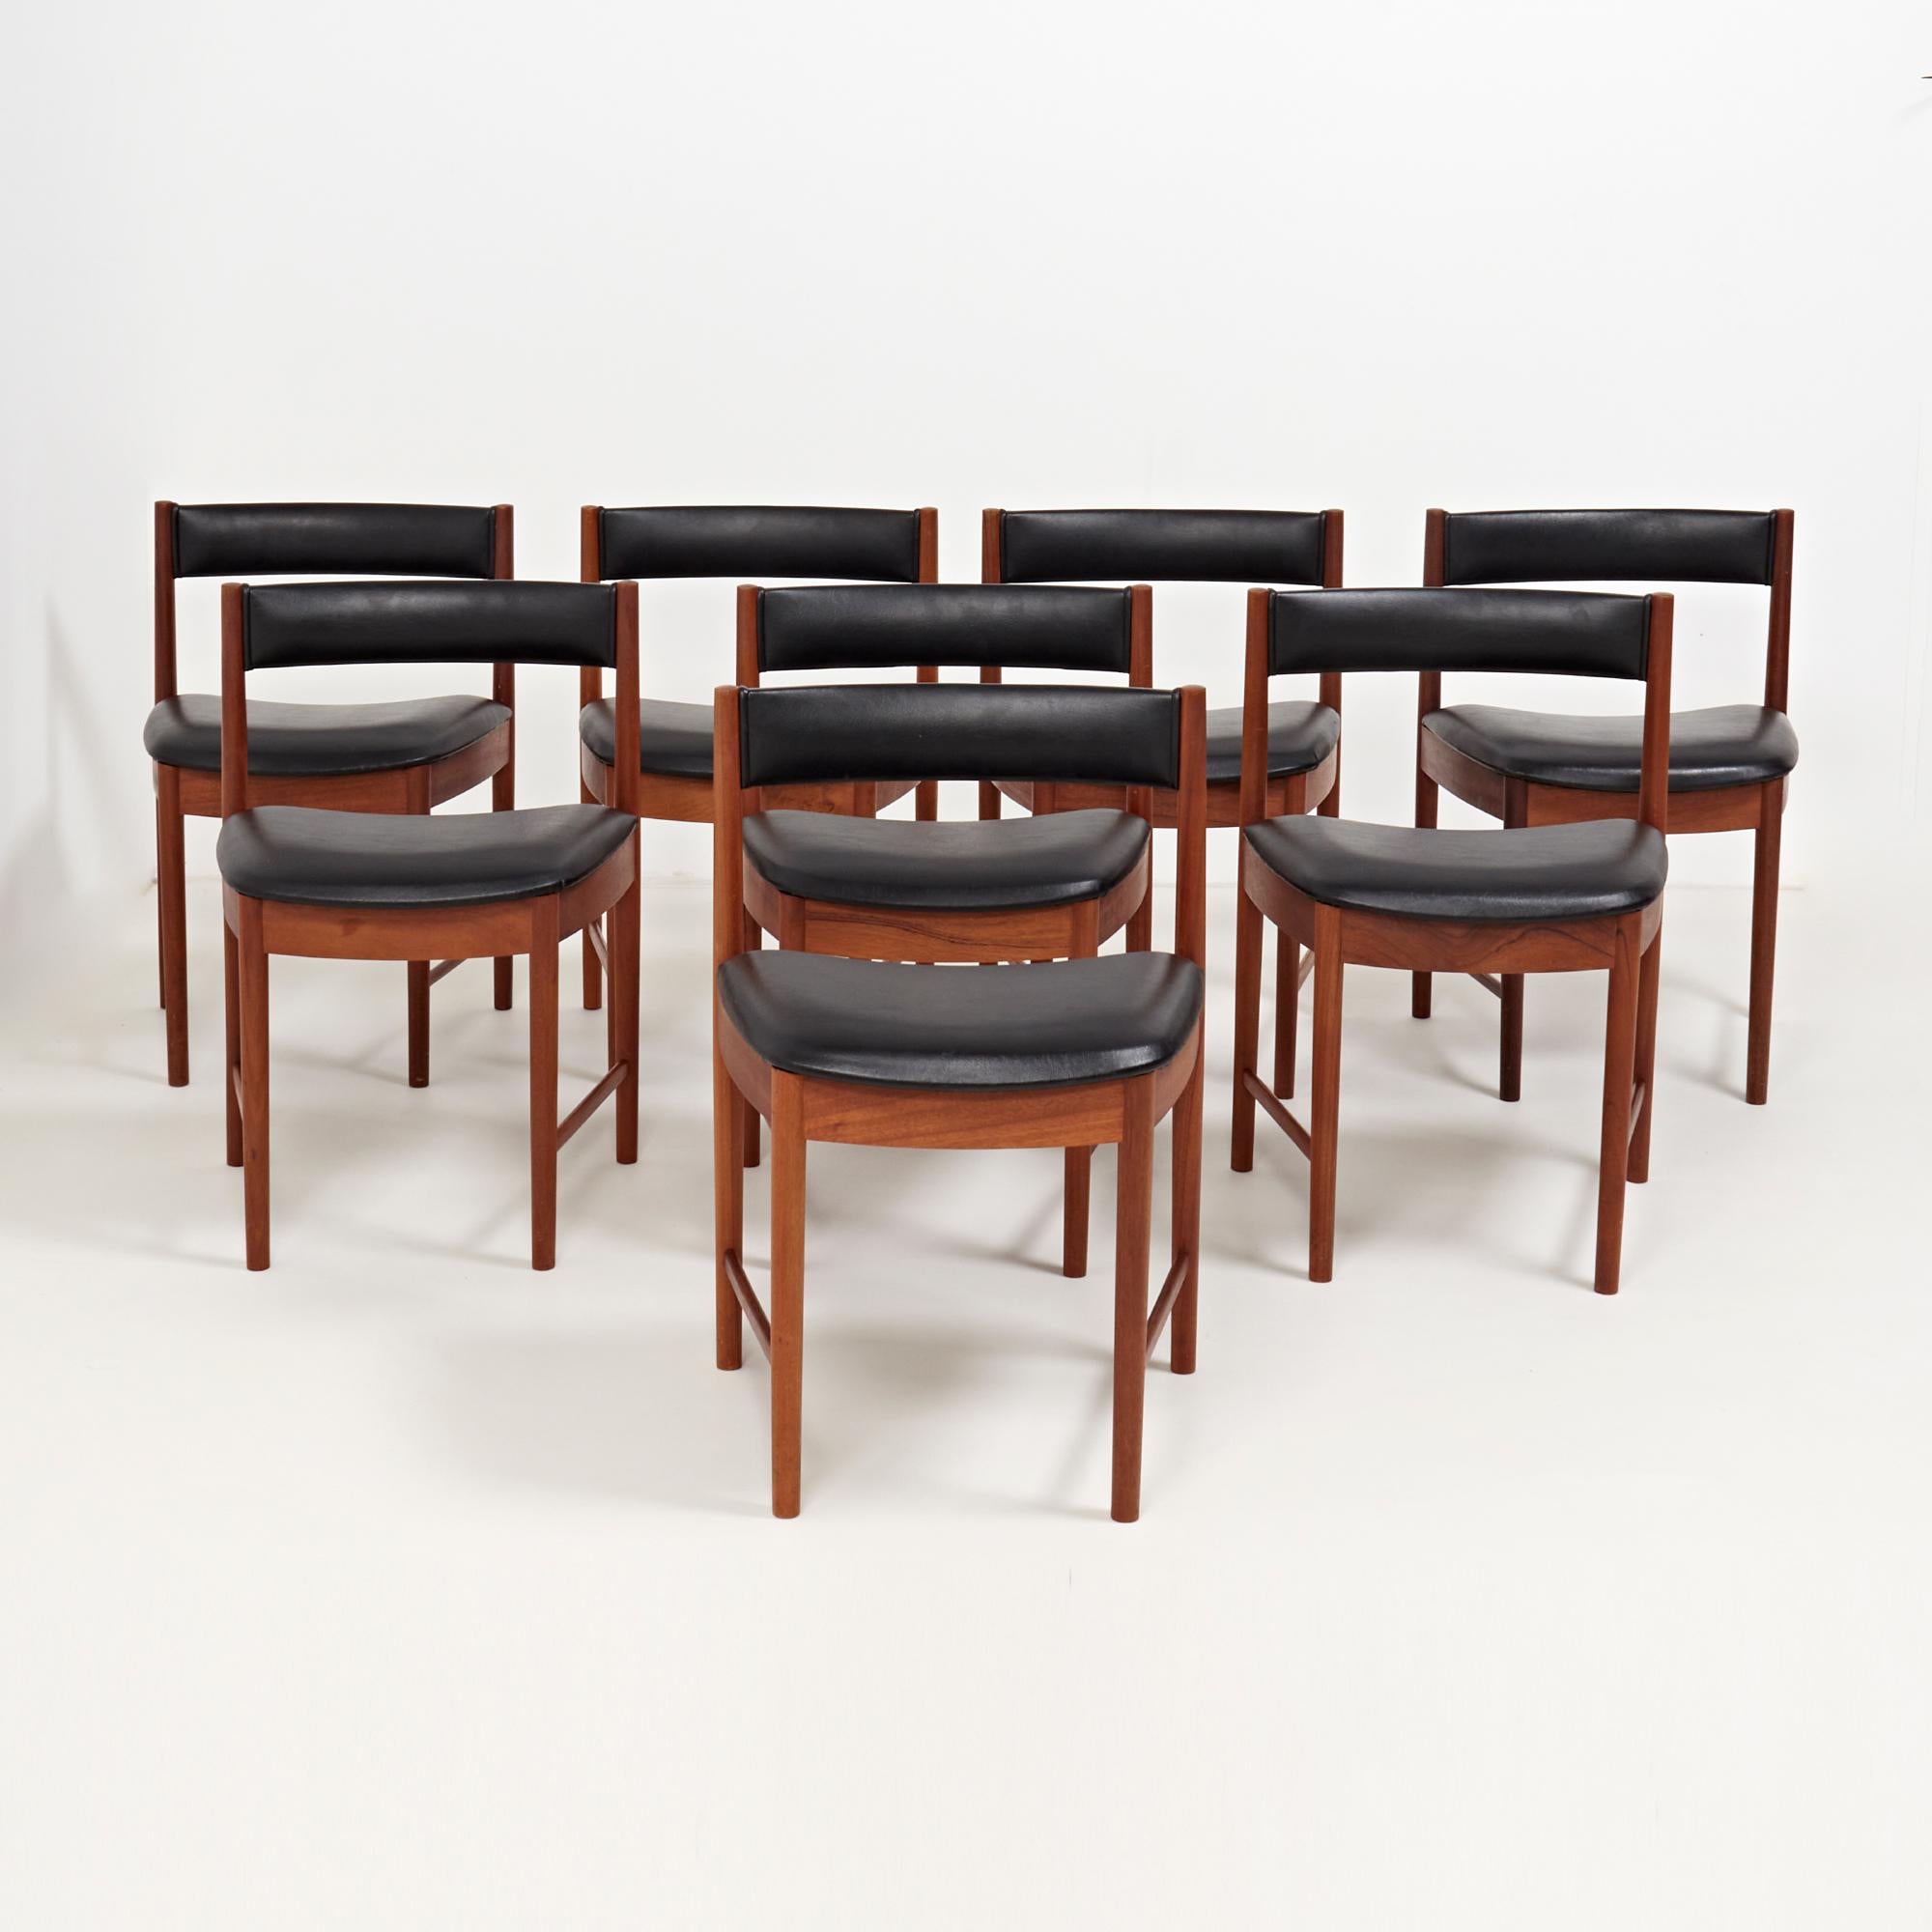 Designed by Scottish furniture designer A. H. McIntosh, this set of 4013 dining chairs are a Classic example of Mid-Century Modern furniture. 

The set of 8 chairs are crafted from teak wood with the original black leatherette upholstery on the